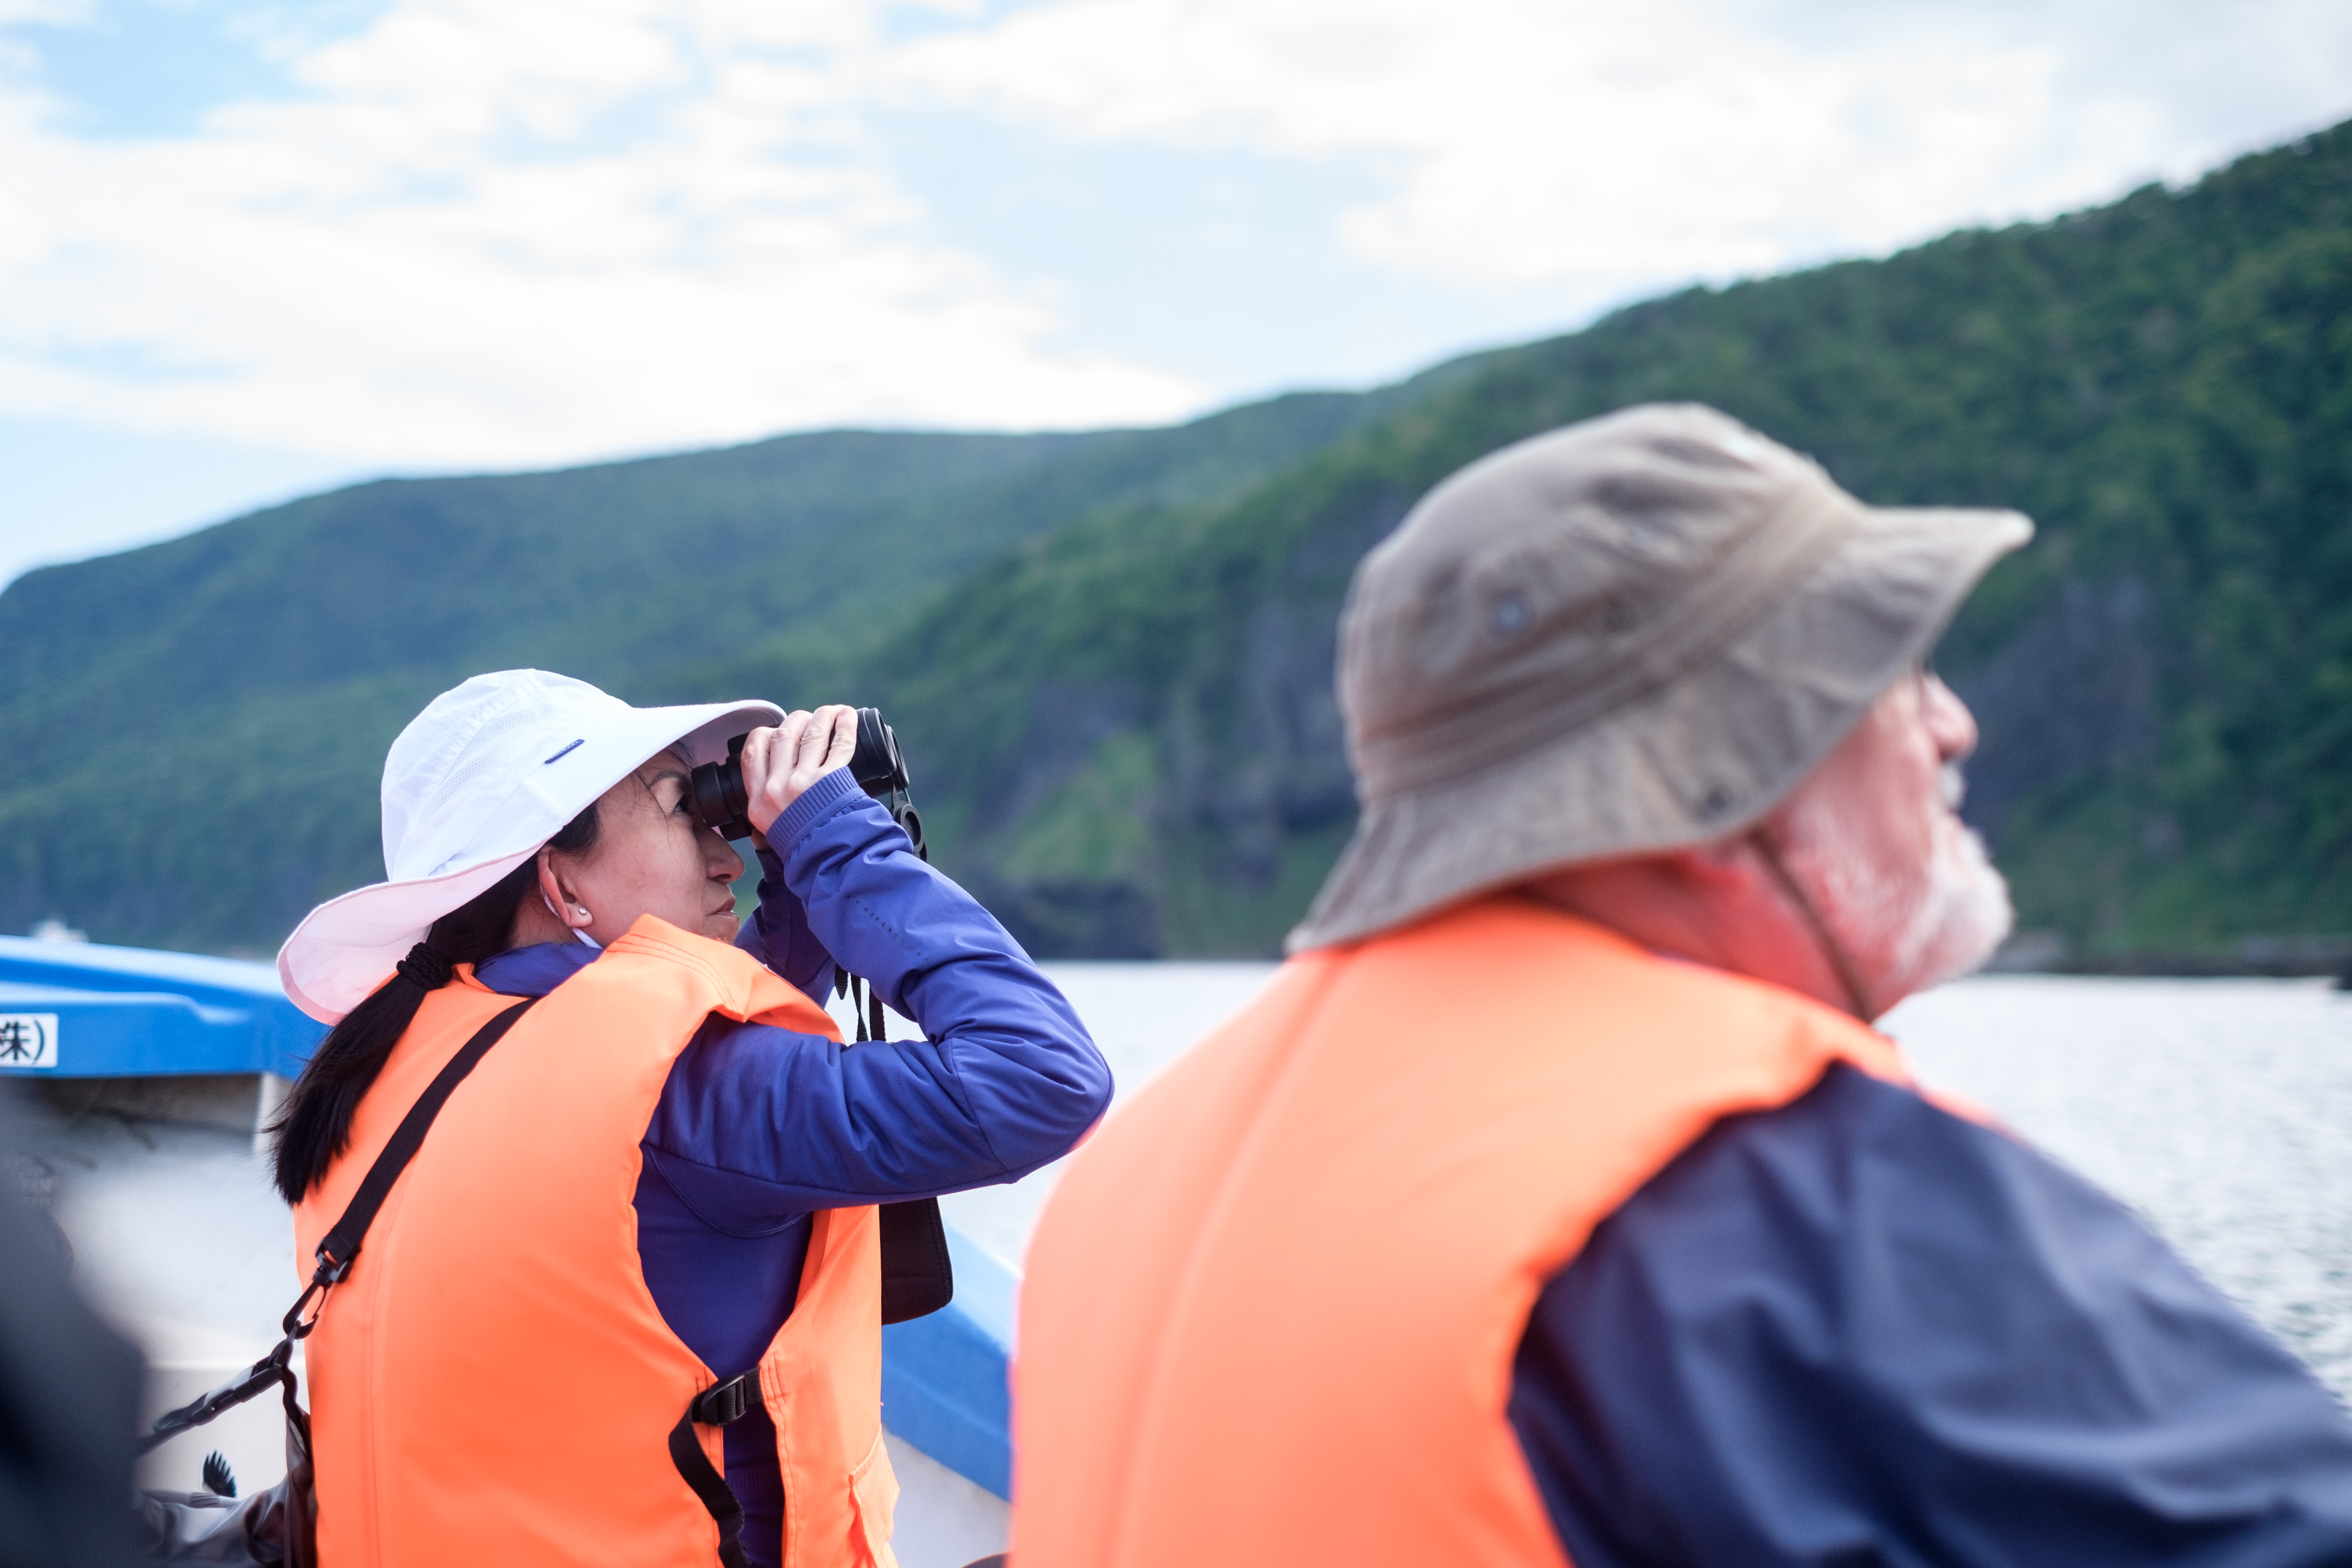 A wildlife watcher wearing a life jacket uses binoculars to look for Brown Bear from a small boat